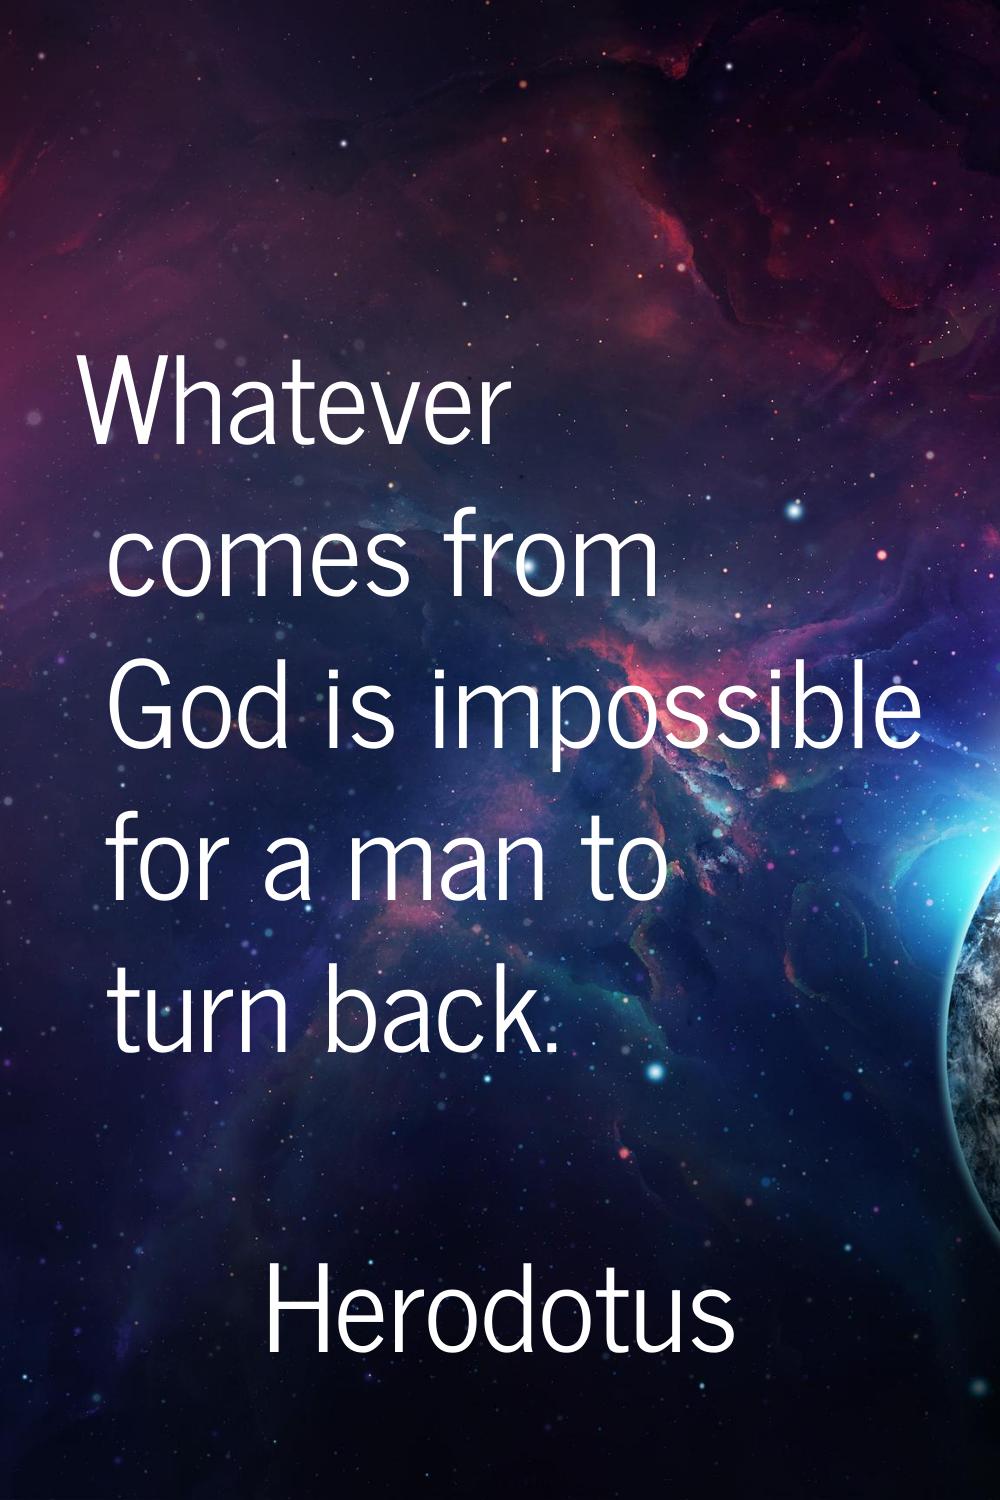 Whatever comes from God is impossible for a man to turn back.